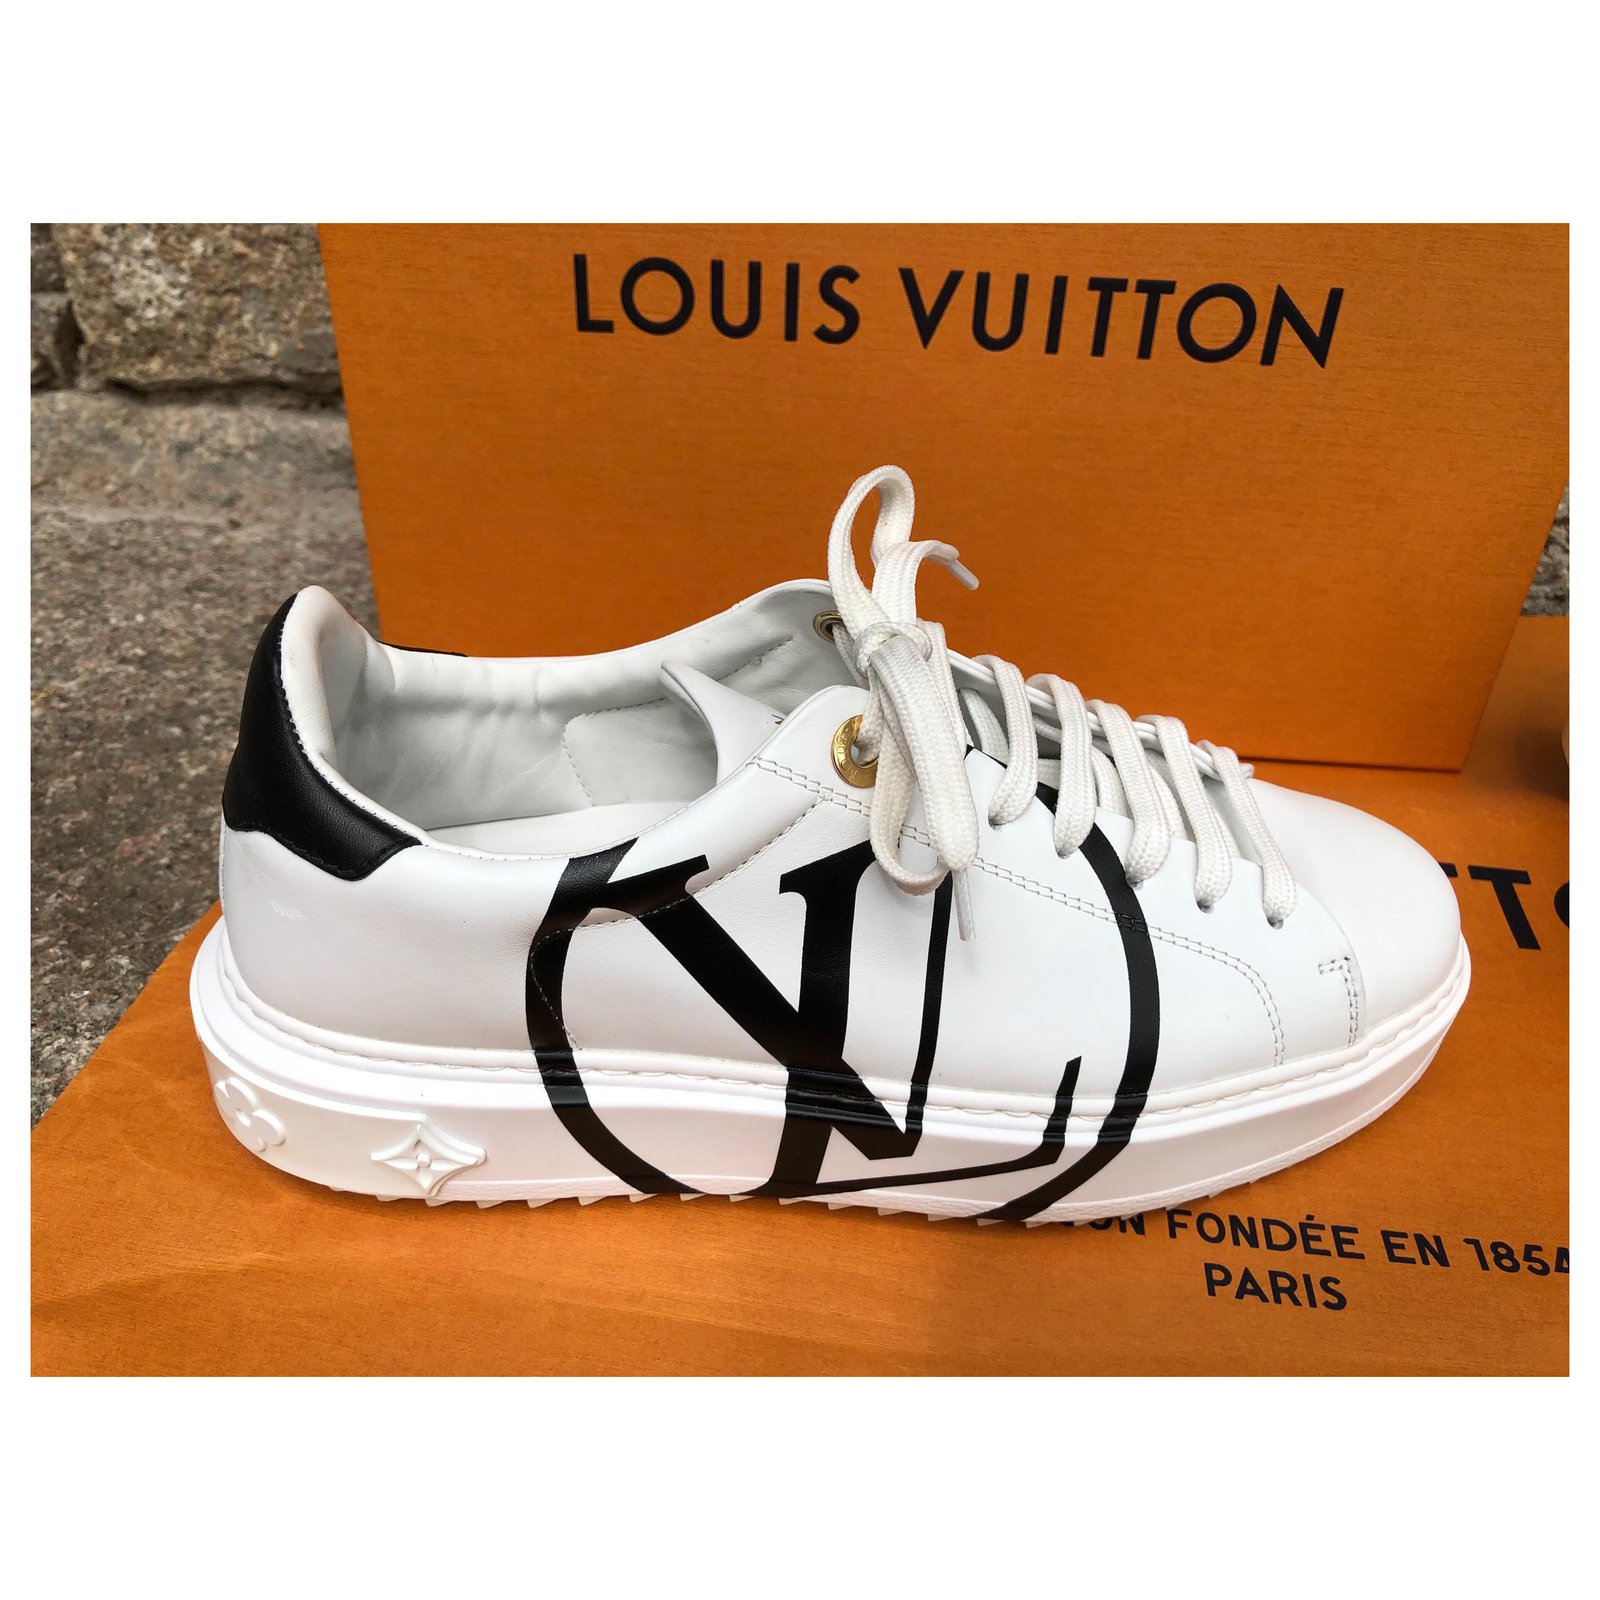 Guy´s Eclectic Choice of The Week”: Louis Vuitton – Escale